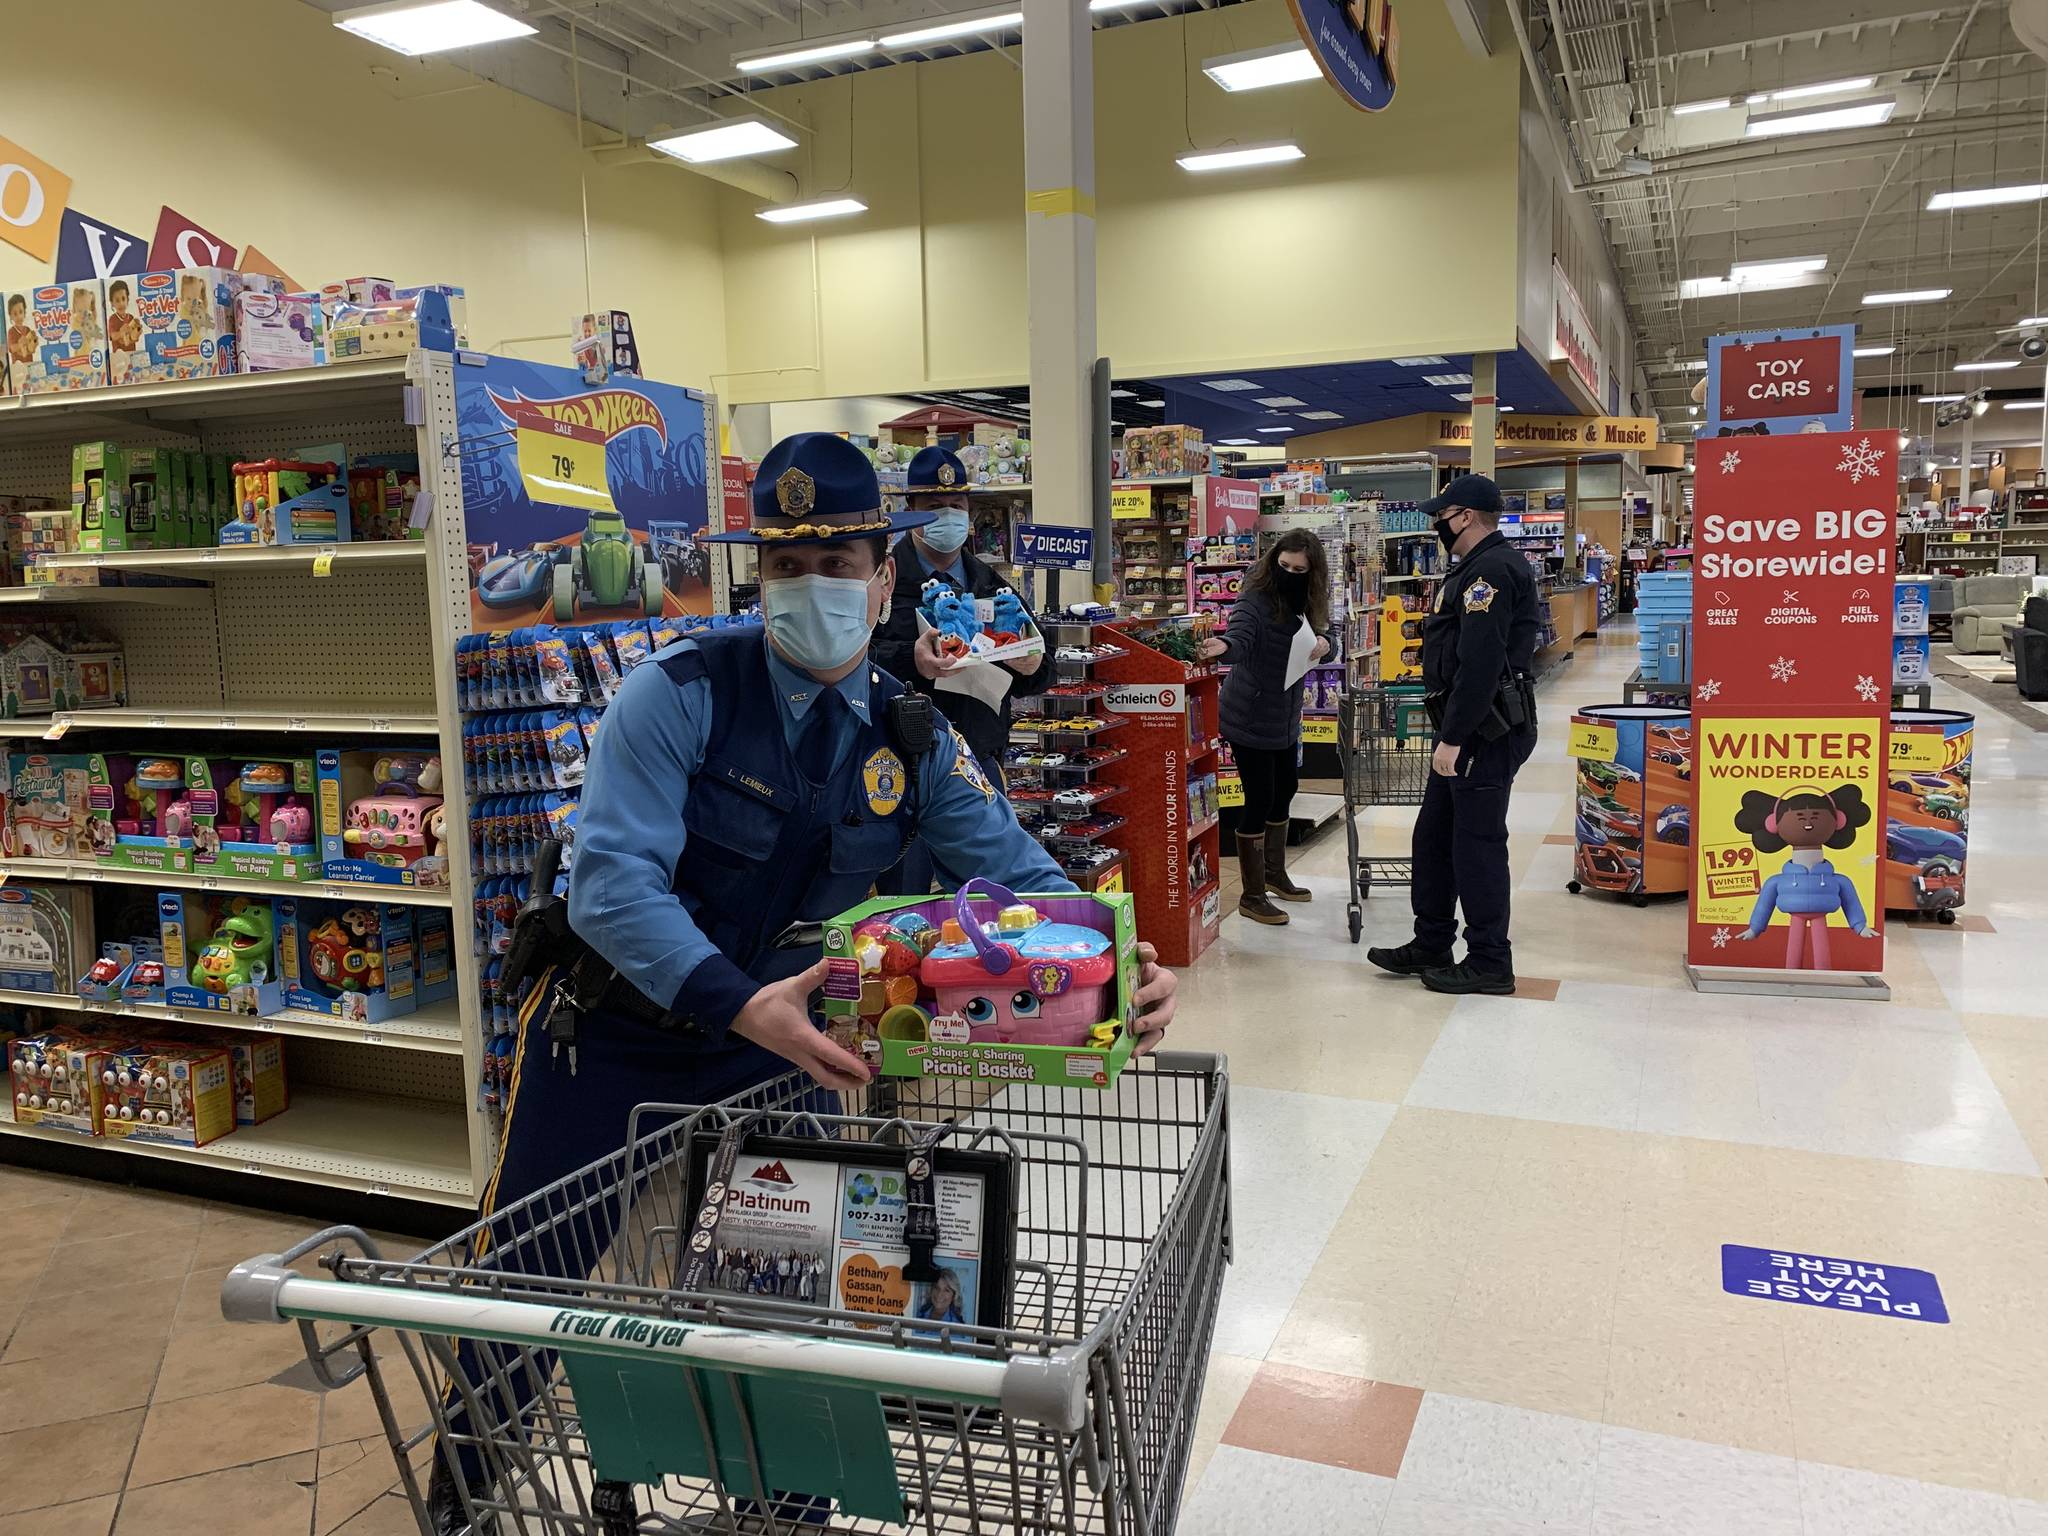 Alaska State Troopers shop for Juneau families at Fred Meyer on Dec. 21, 2020 as part of the Alaska Police Officer Association’s annual “Shop with a Cop” event for Christmas. (Courtesy photo / Alaska State Troopers)